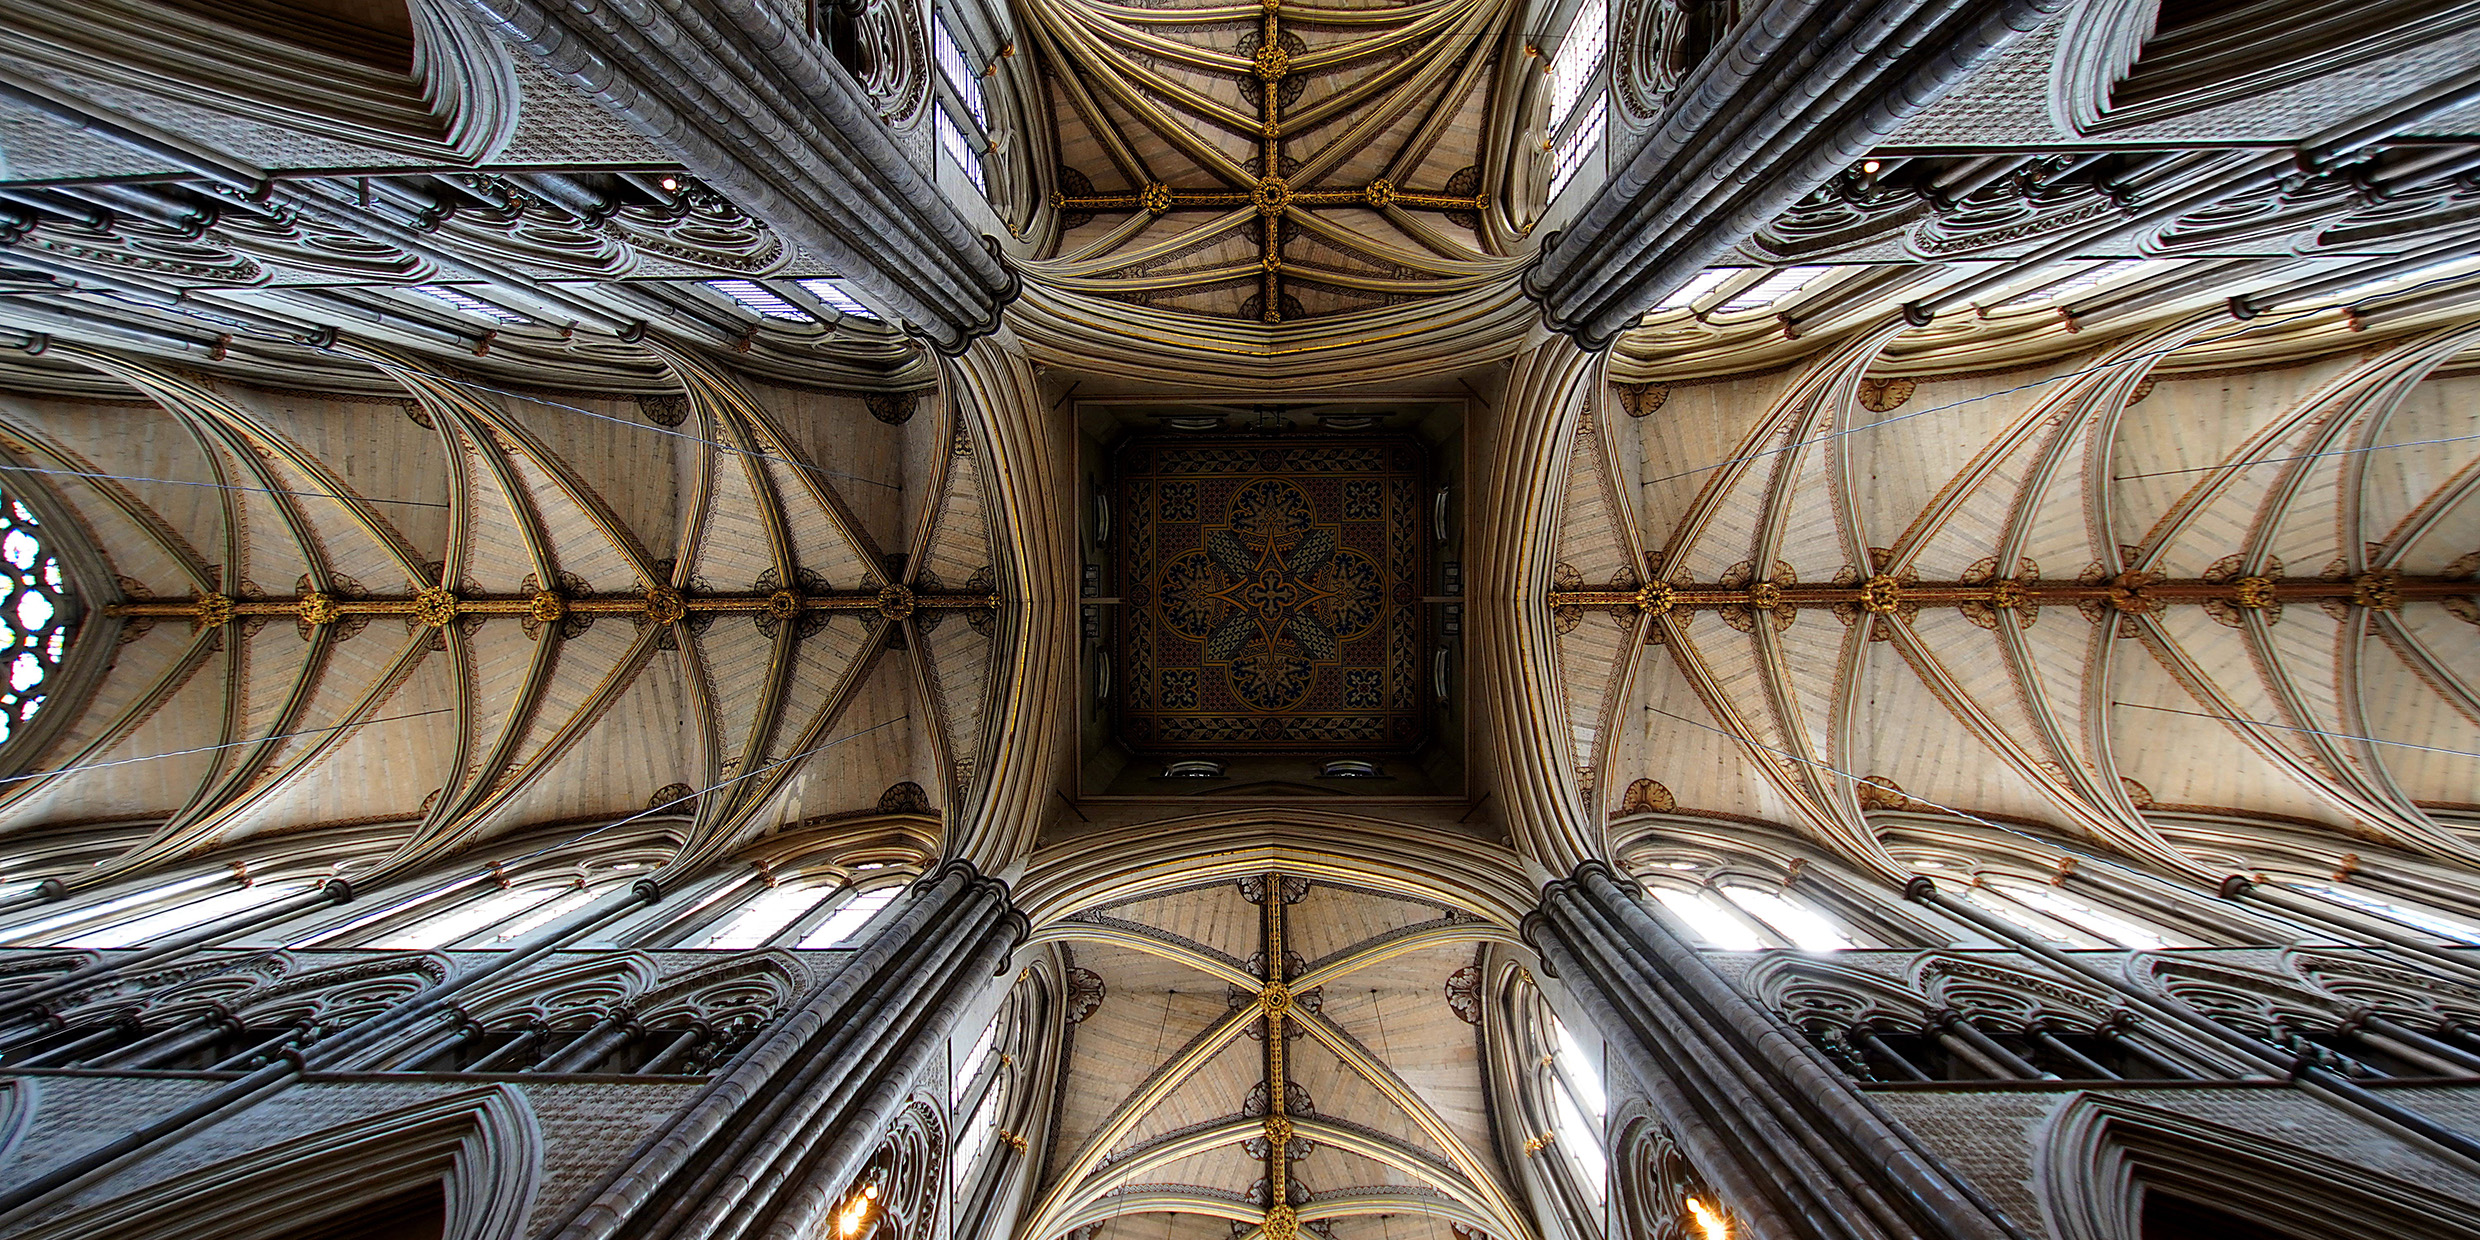 Image of the vaulted ceiling at Westminster Abbey